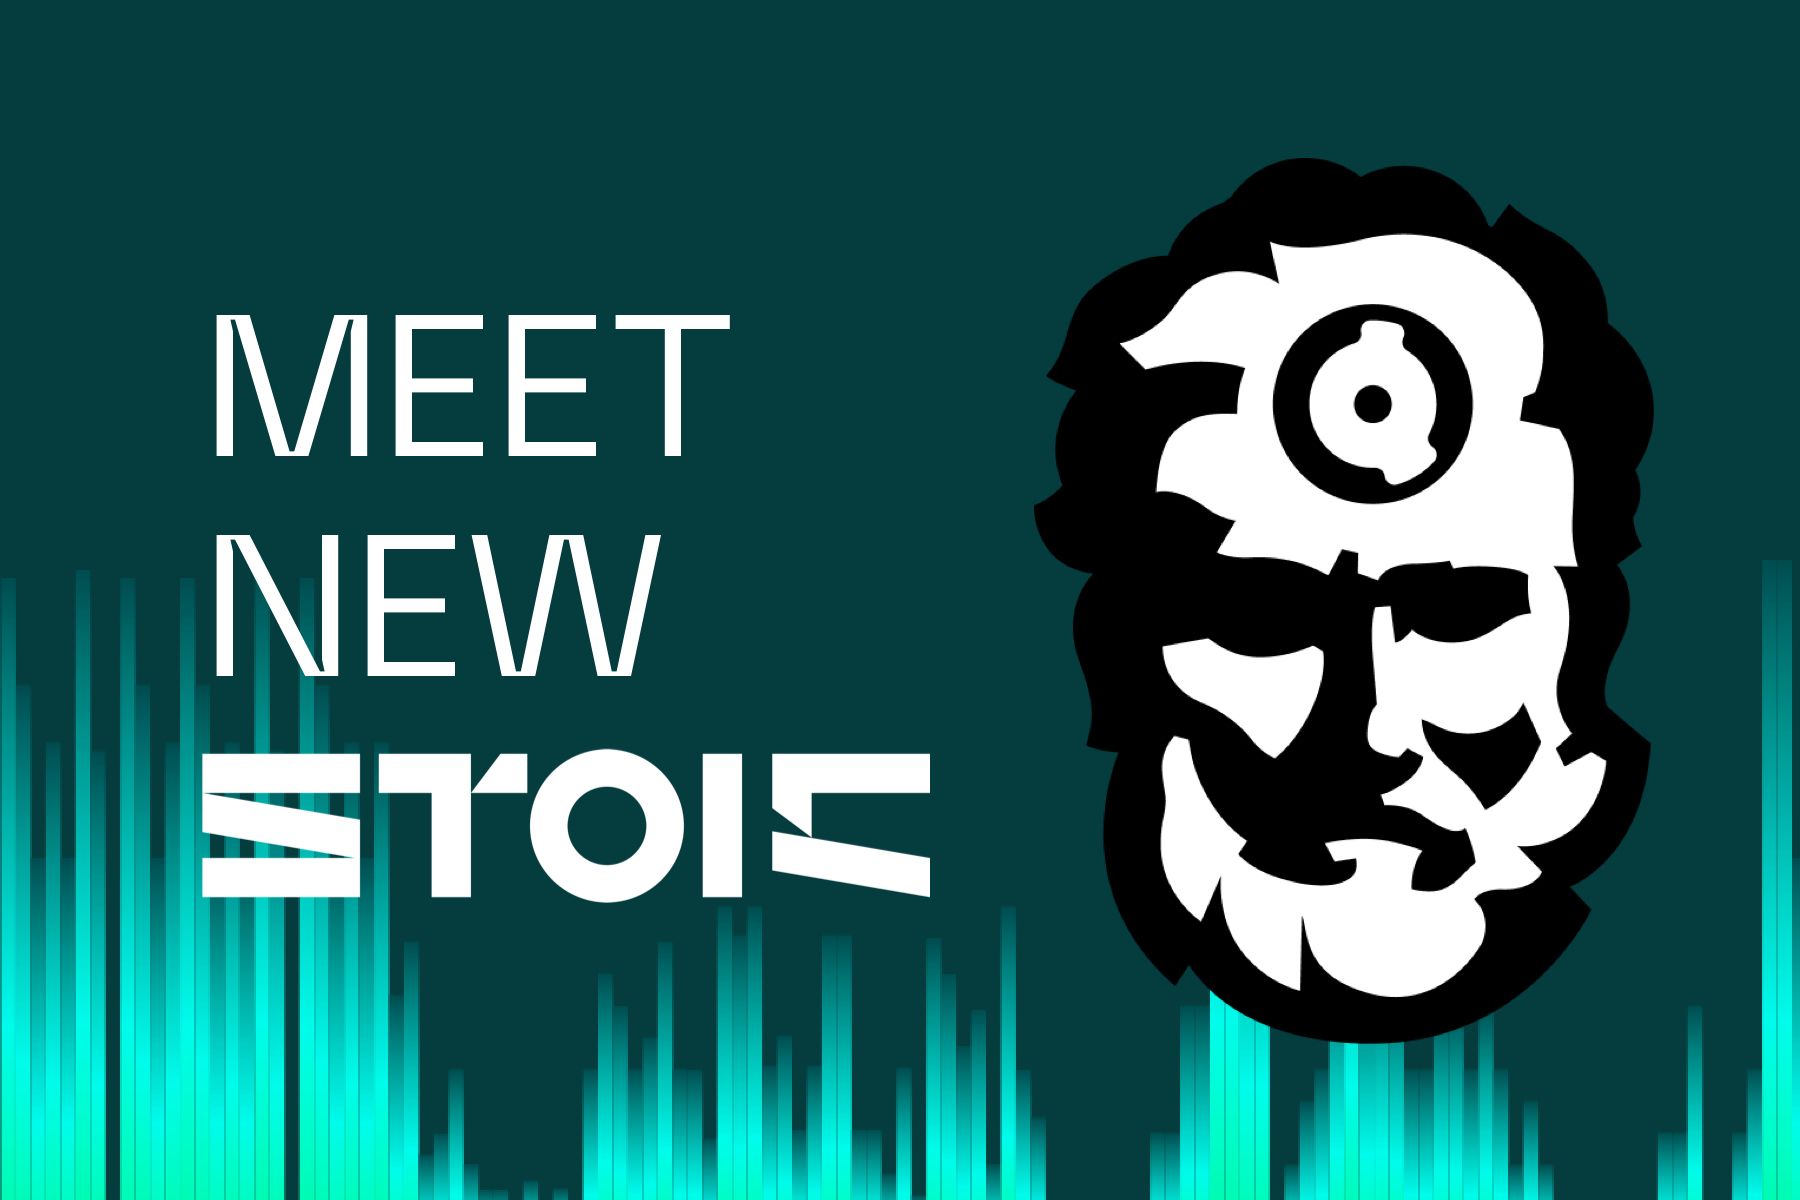 Meet new Stoic: the new brand philosophy for next-generation automated trading